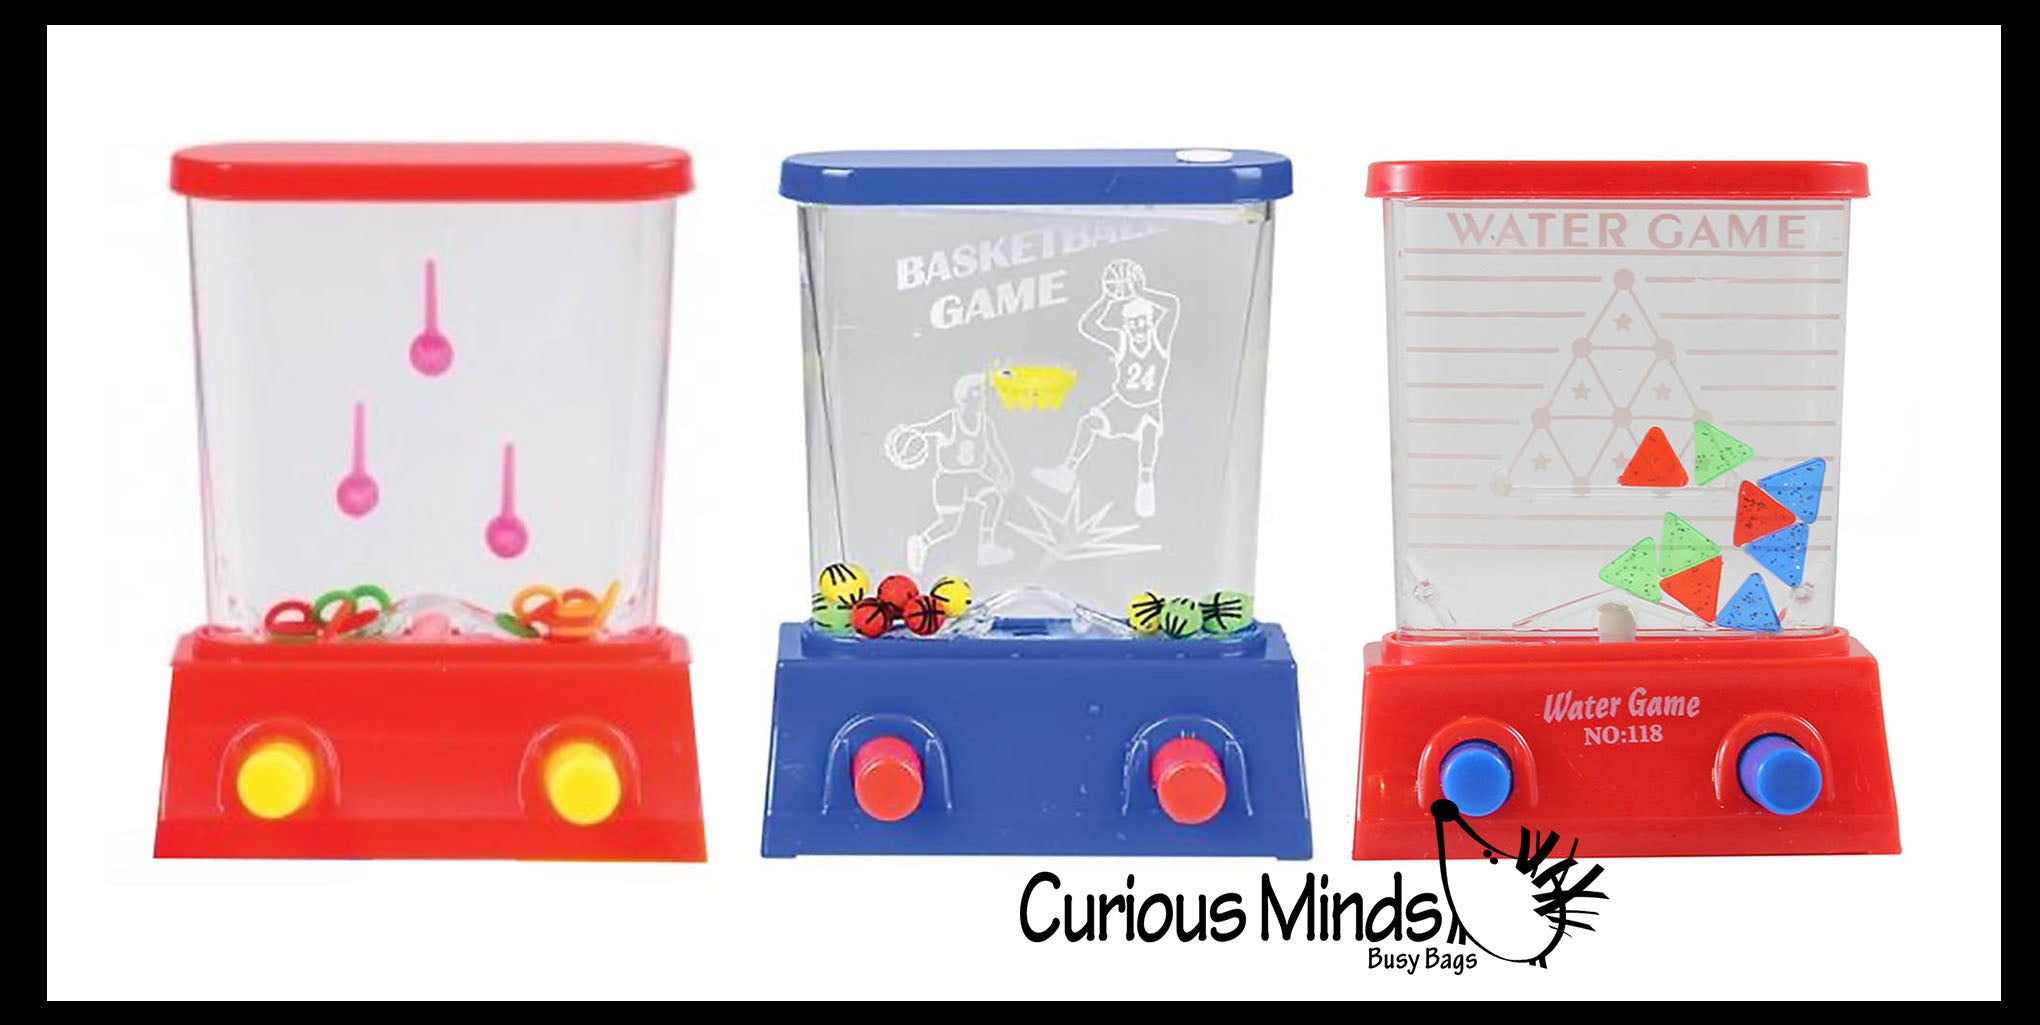 3 Different Styles Small Water Games - Push Button to Push Water and Play - Hand Held Travel Arcade Game - Party Favors